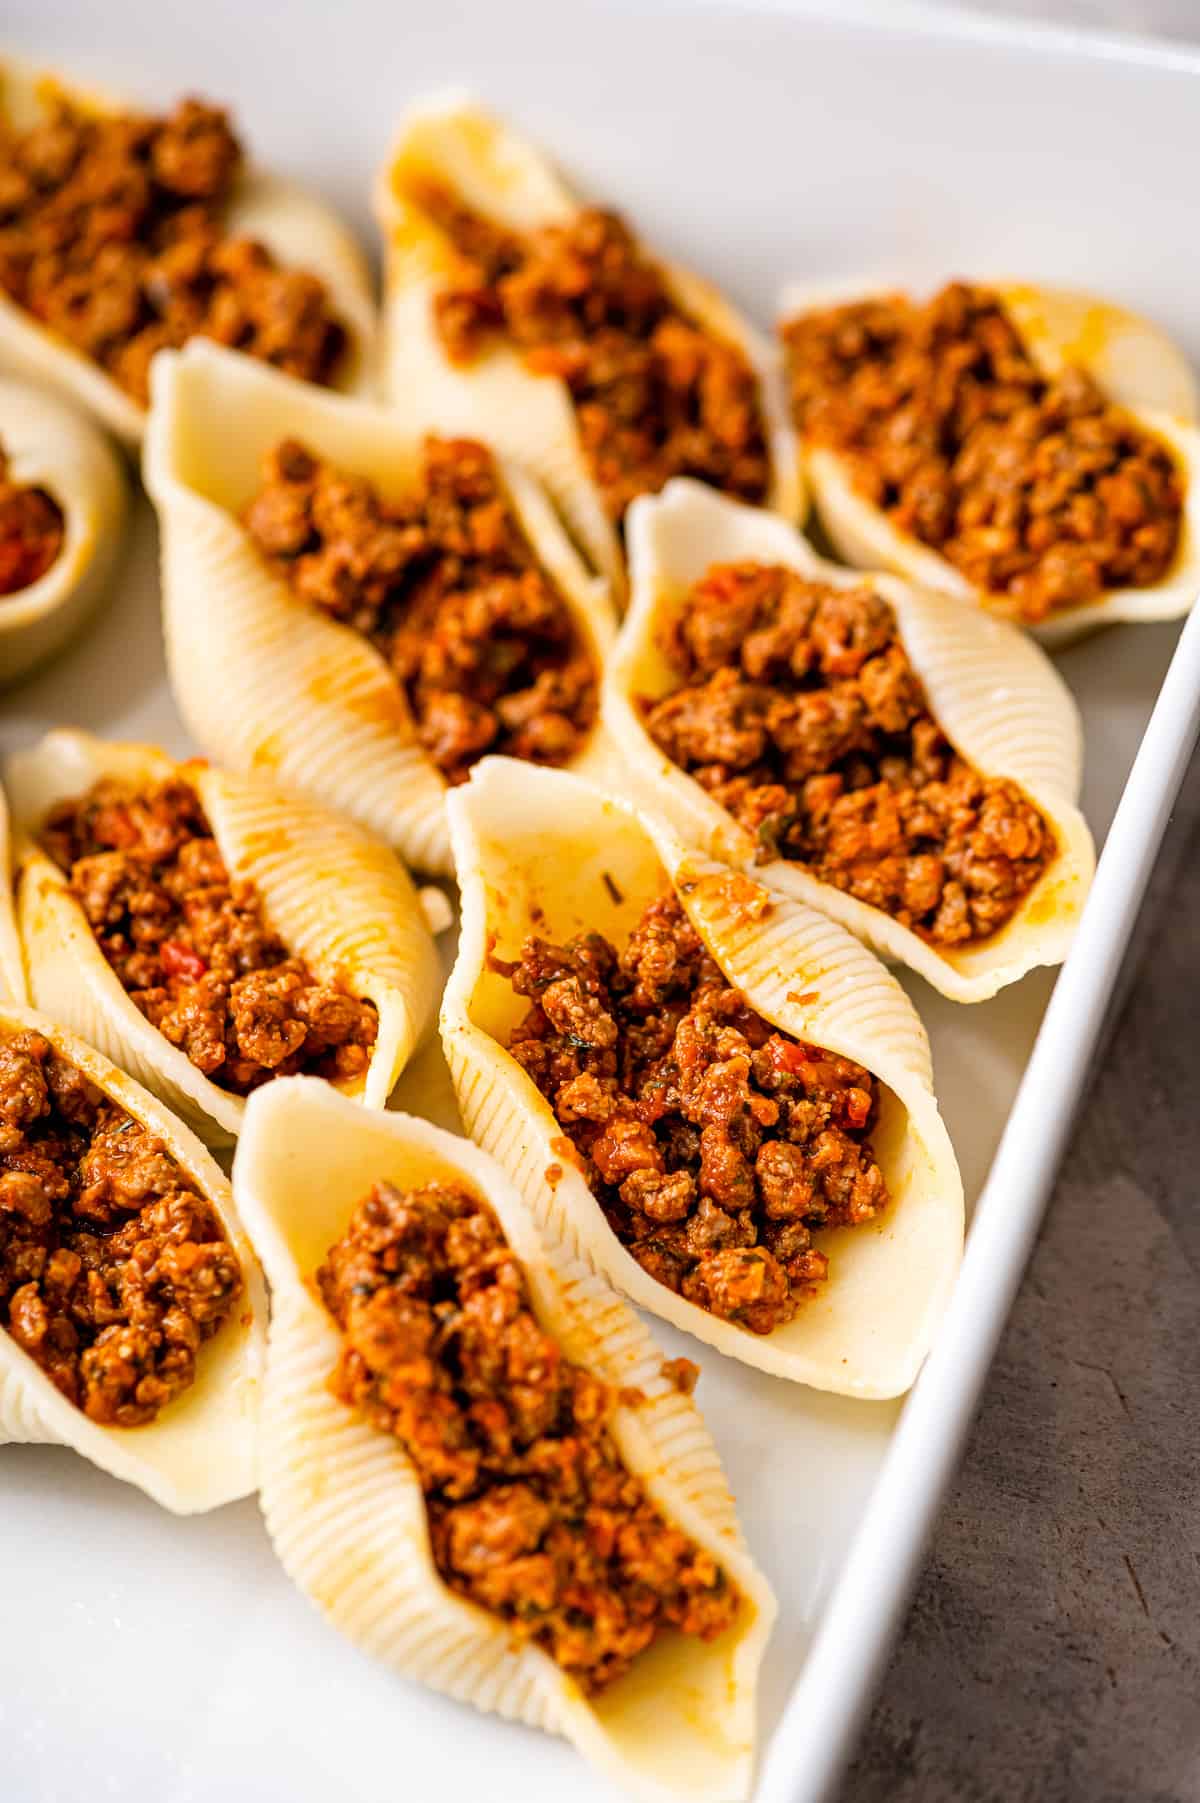 Casserole dish with jumbo pasta shells filled with taco meat